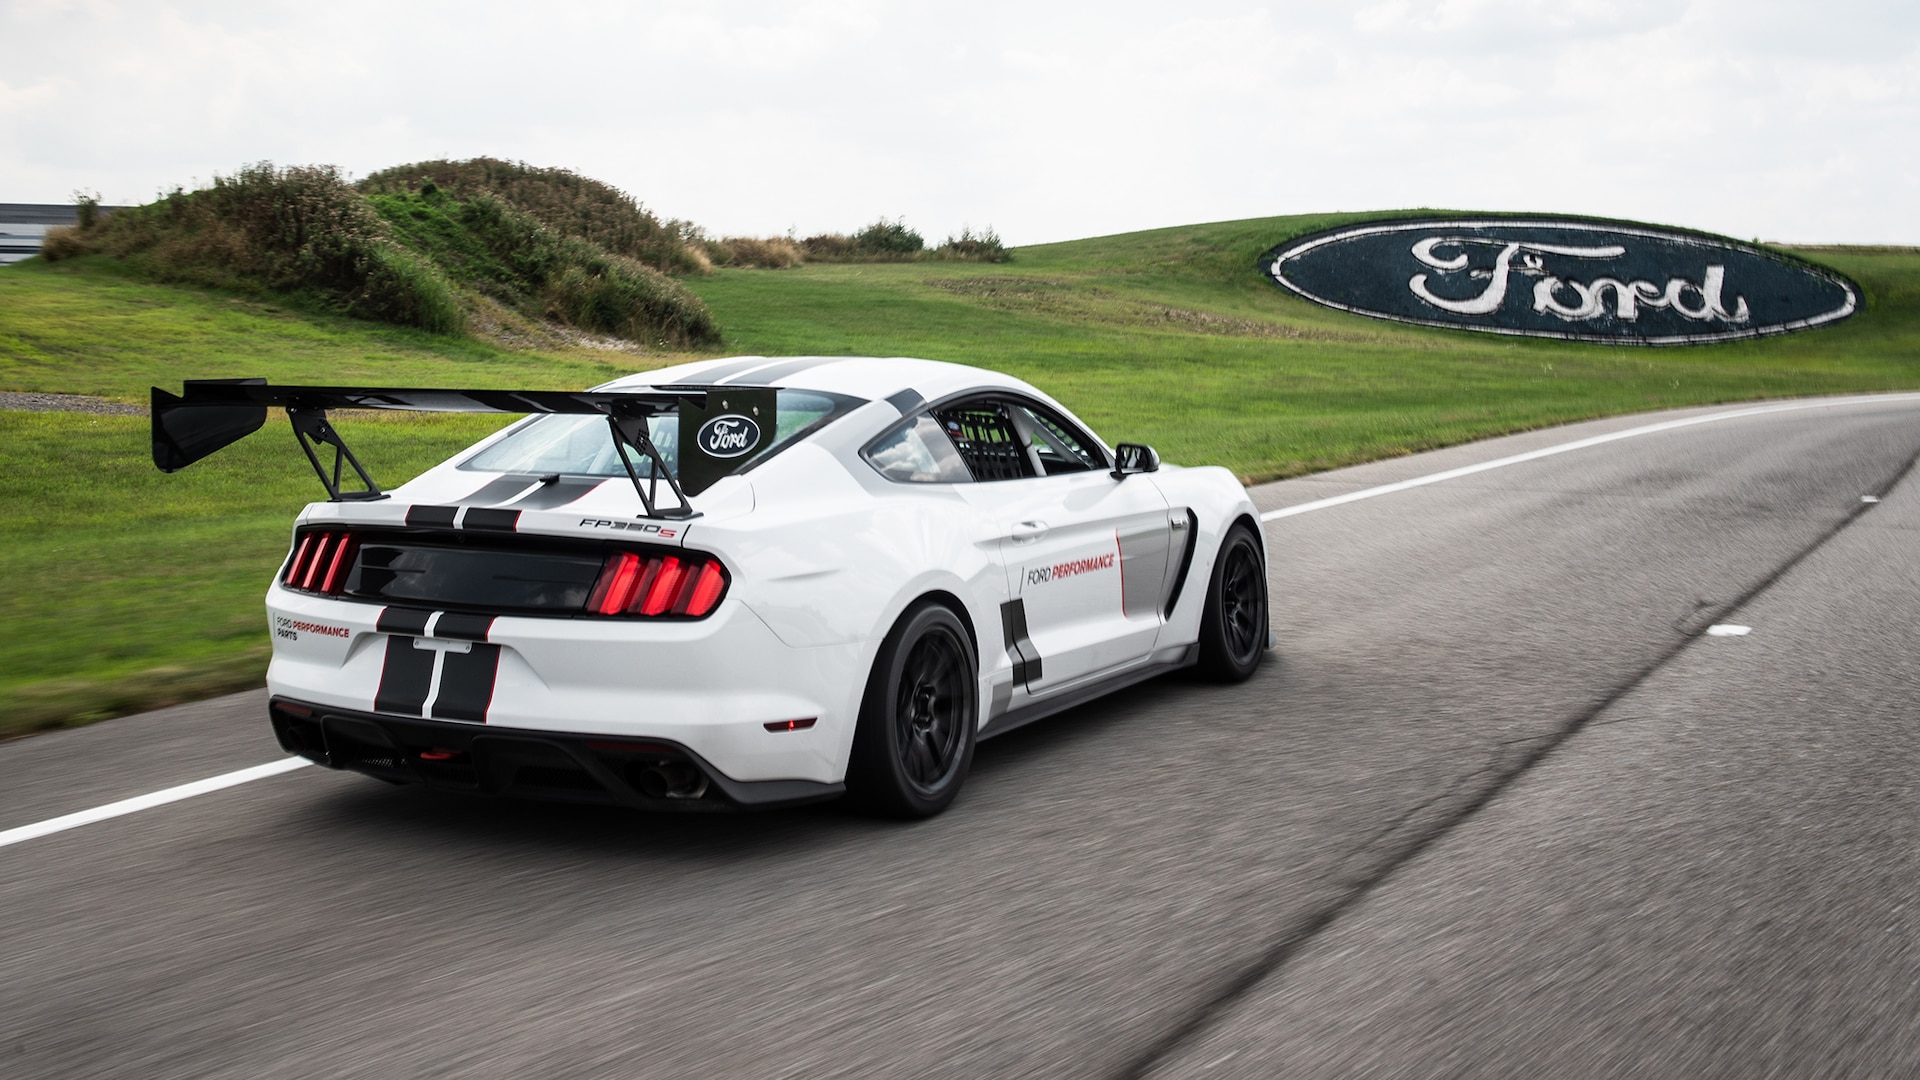 Ford Shelby Fp350S Mustang Wallpapers